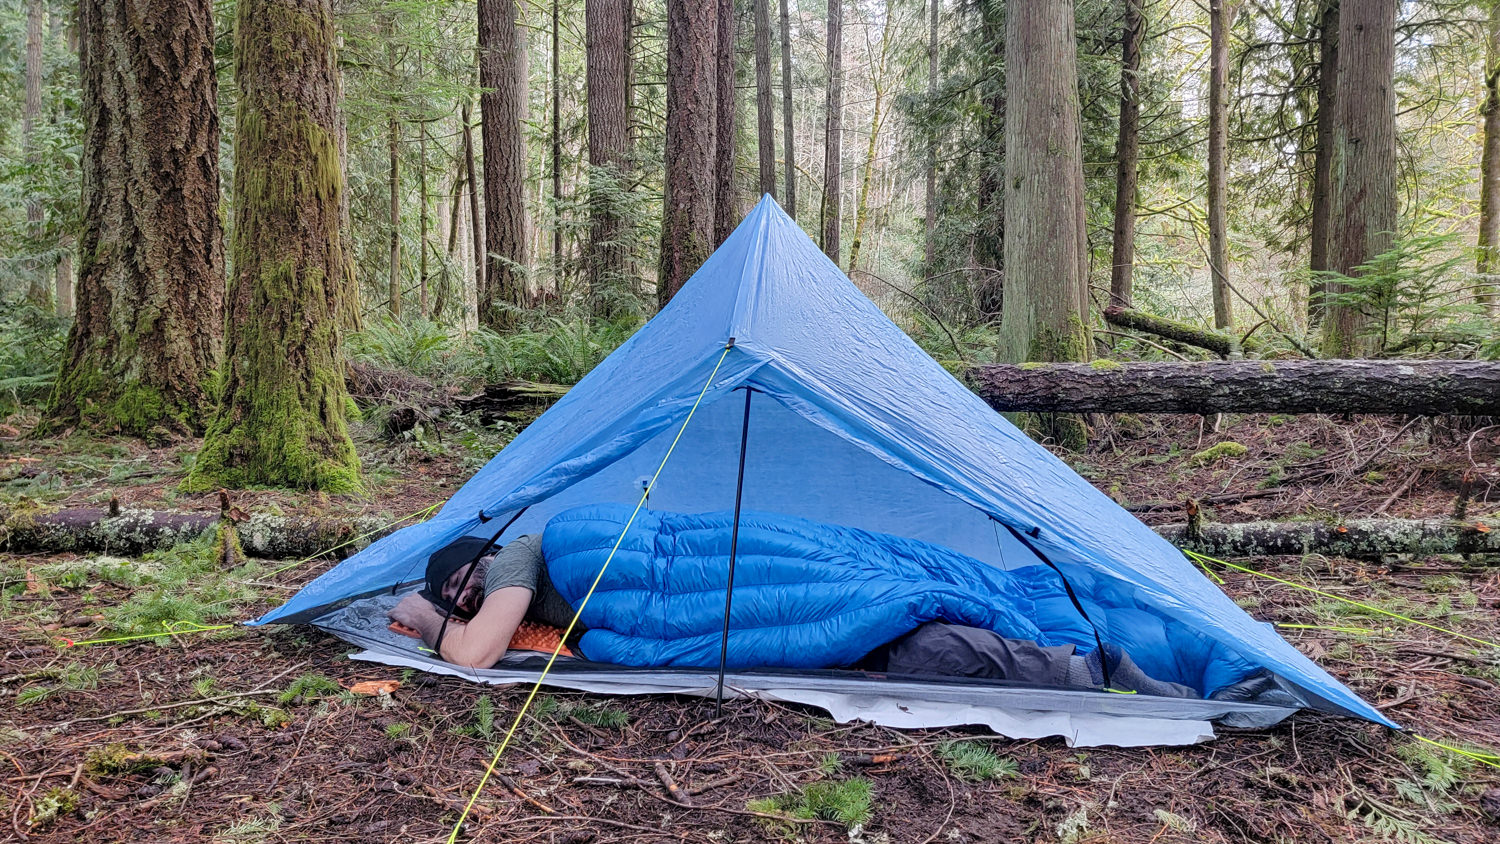 A backpacker sleeping in the Zpacks Plex Solo tent with the Zpacks Mummy Bag open for ventilation